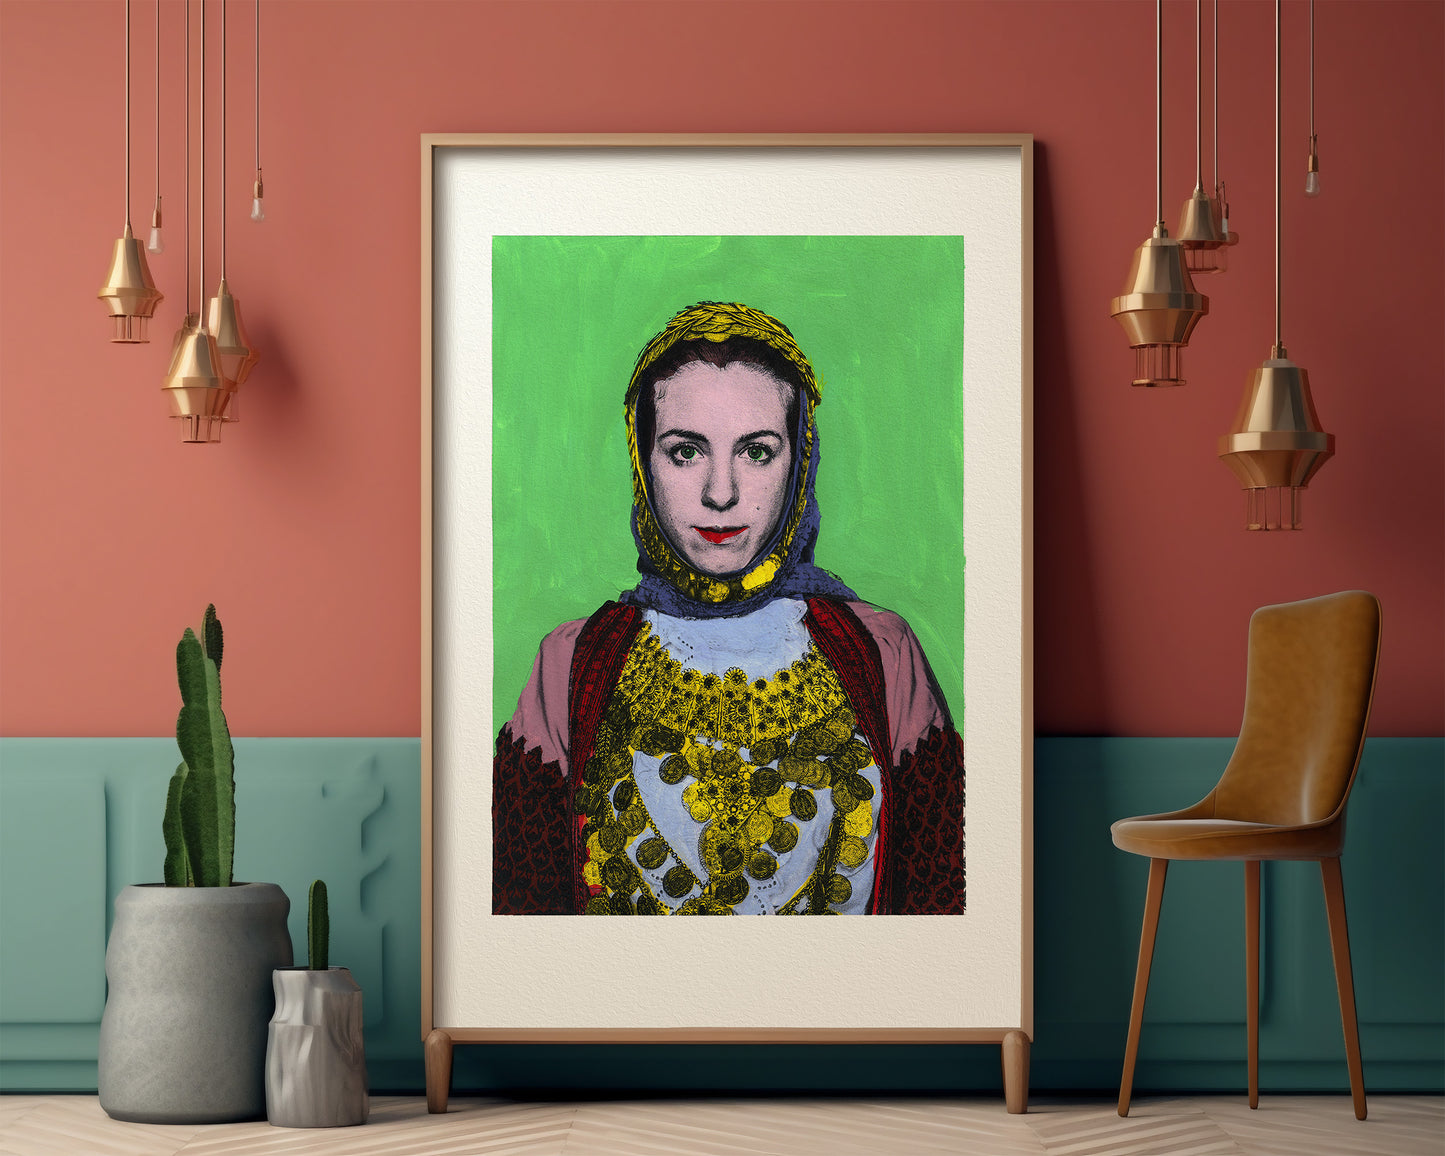 Painting Pop Art Wall Art from Greece | Bright Green Kalyvia Costume from Attica, by George Tatakis - inside an eclectic room